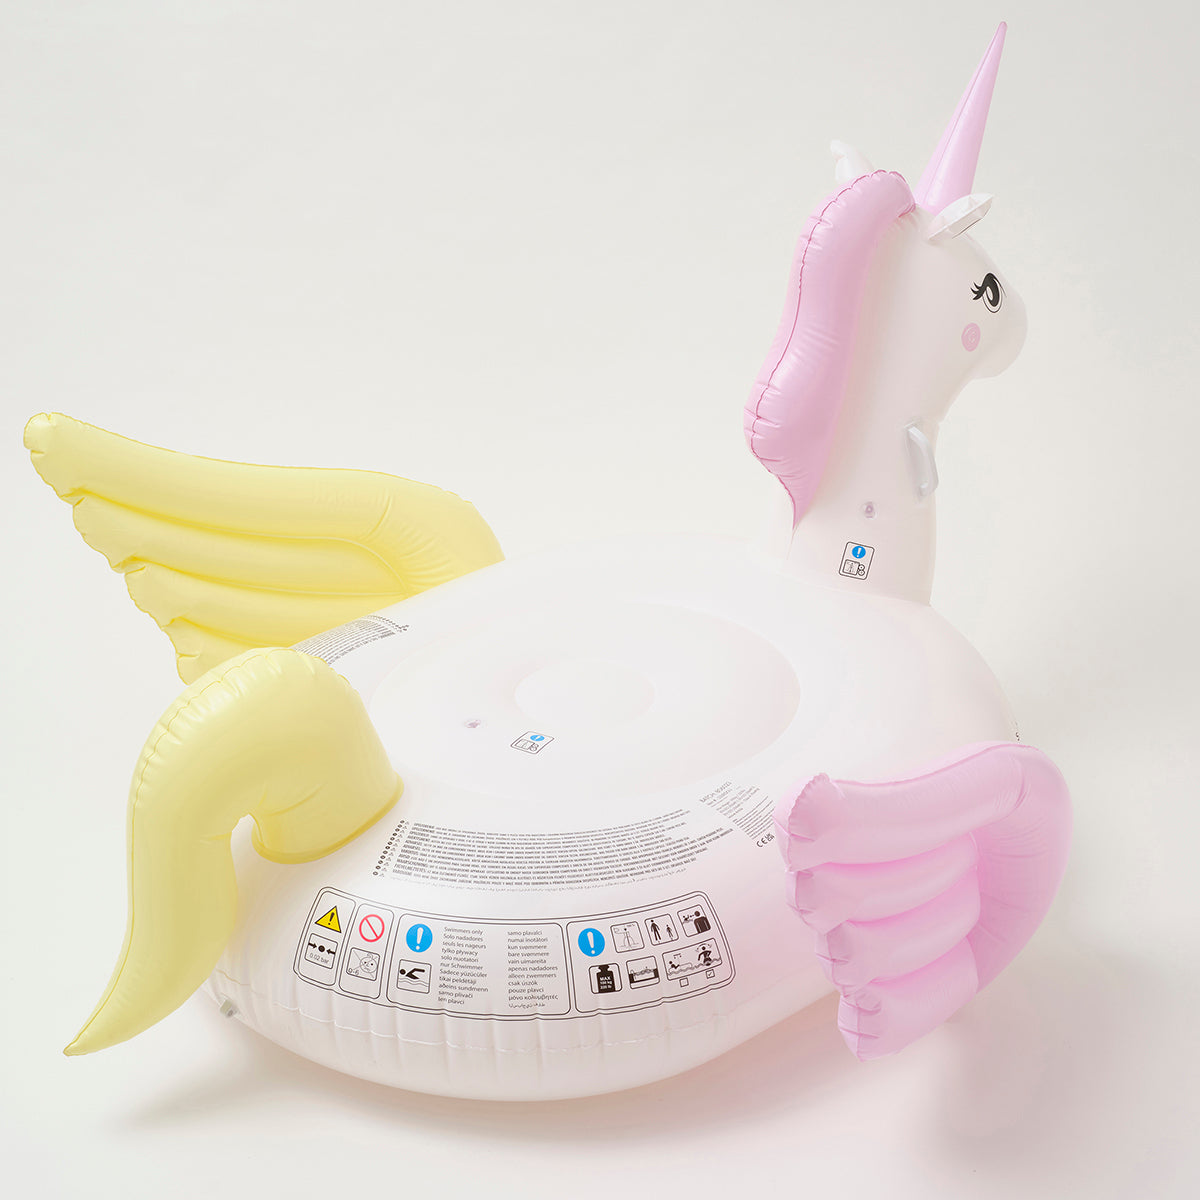 SUNNYLiFE pastel color inflatable Unicorn Luxe Ride-On Float